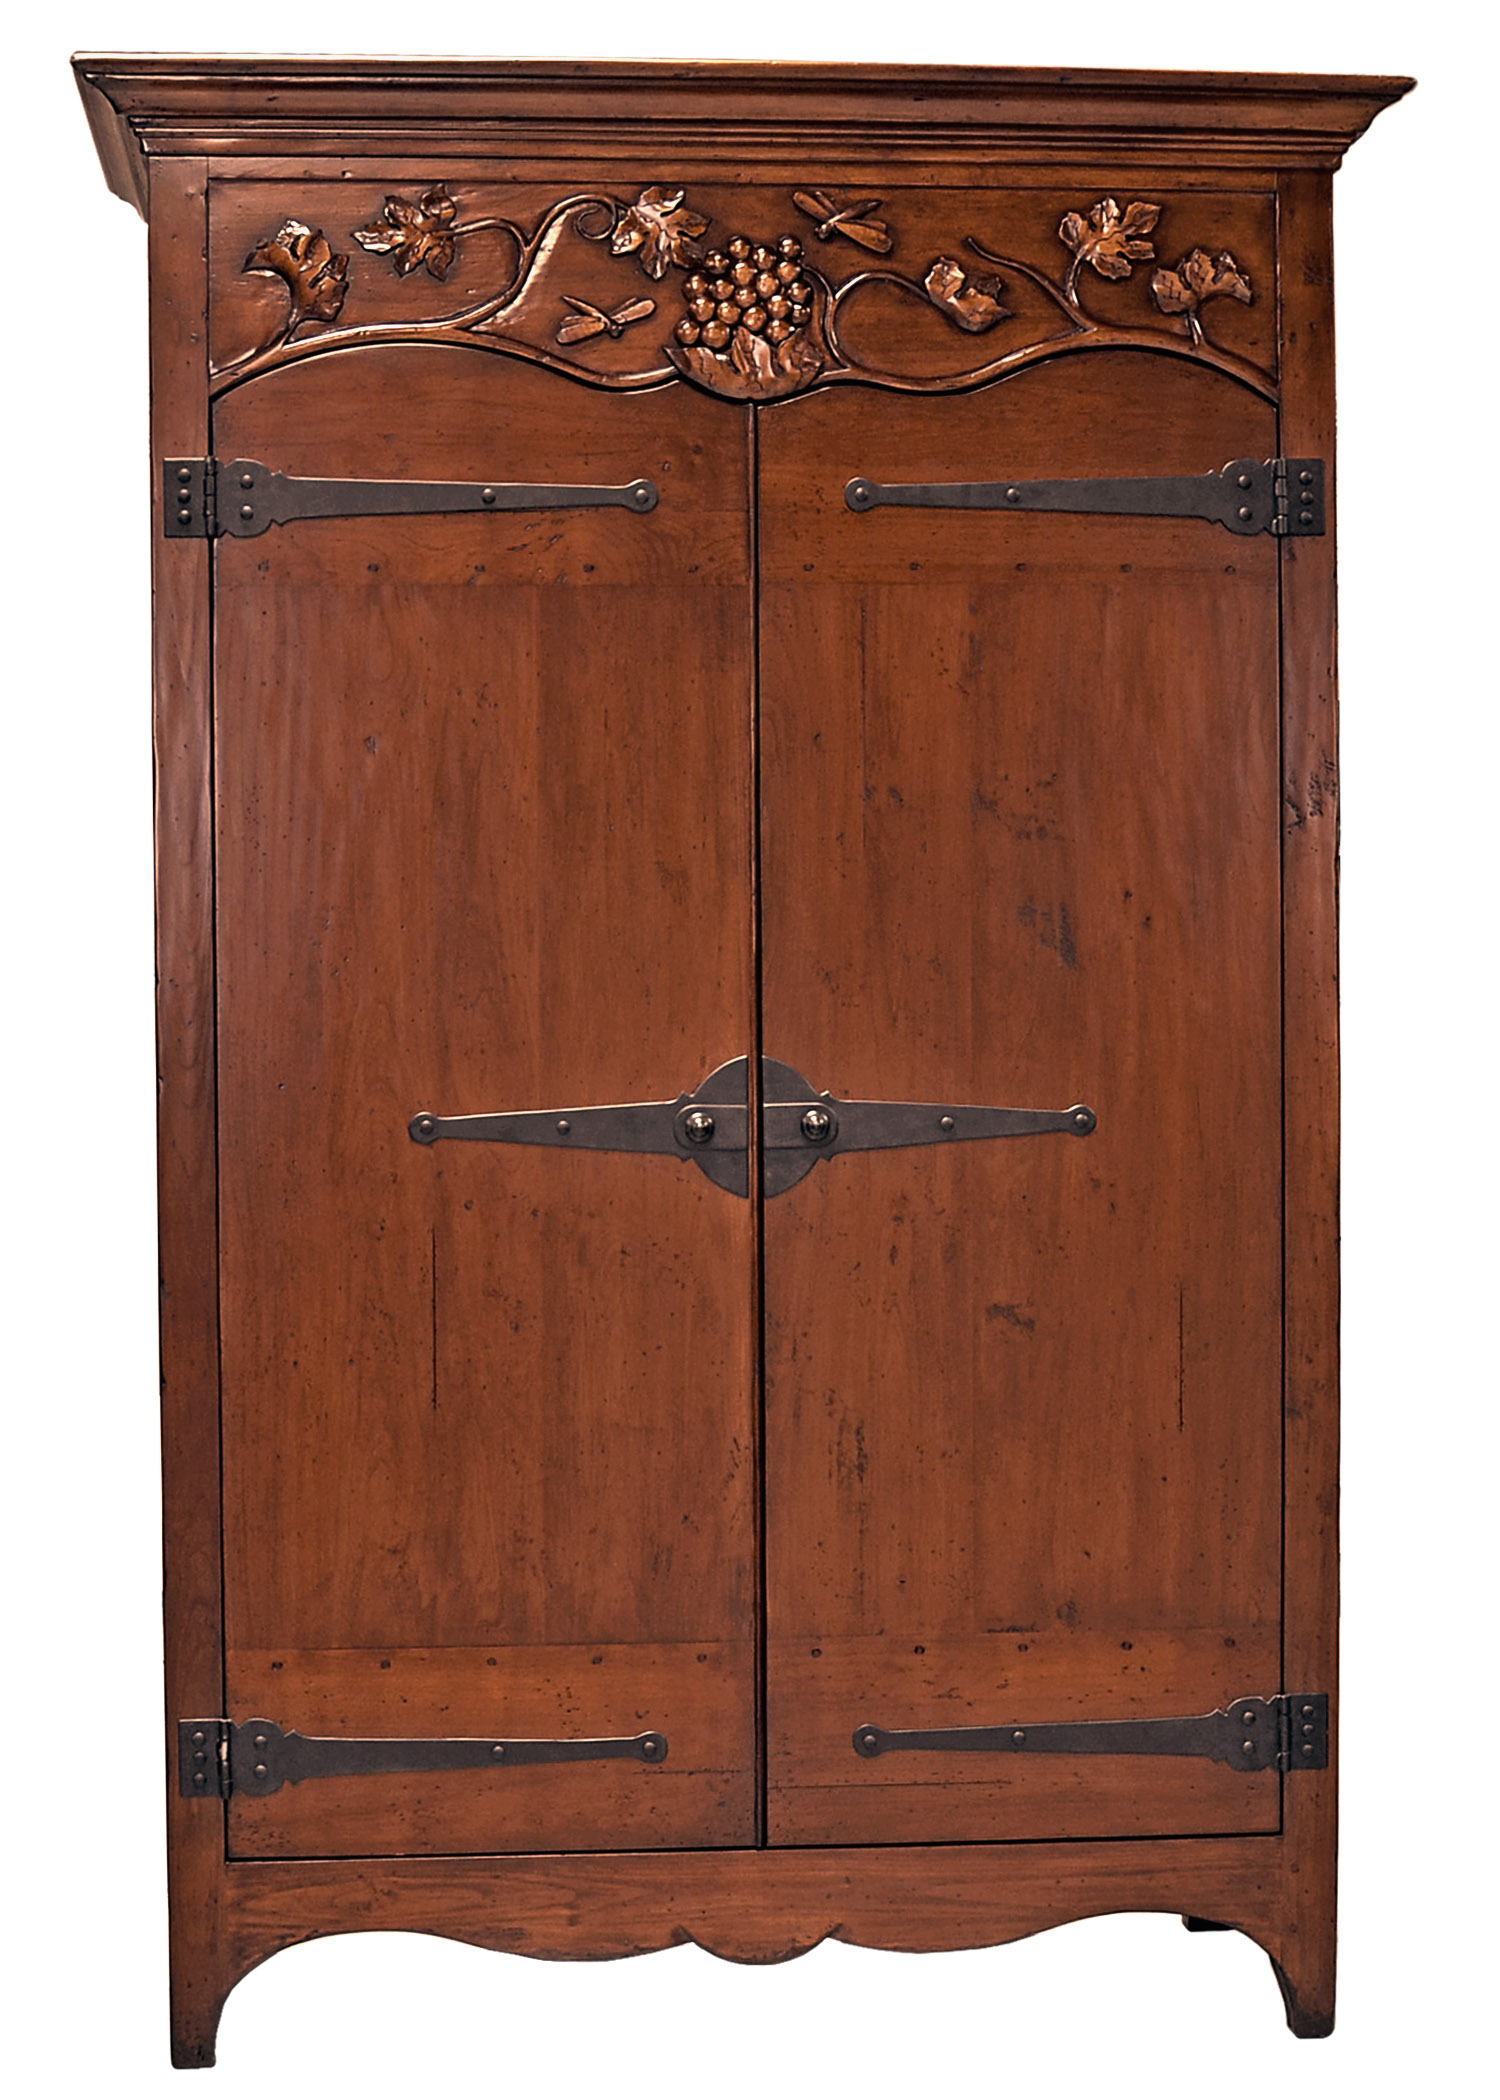 Leandro traditional armoire cabinet with hand-carved detail and decorative hinges on two doors by Woodland furniture in Idaho Falls